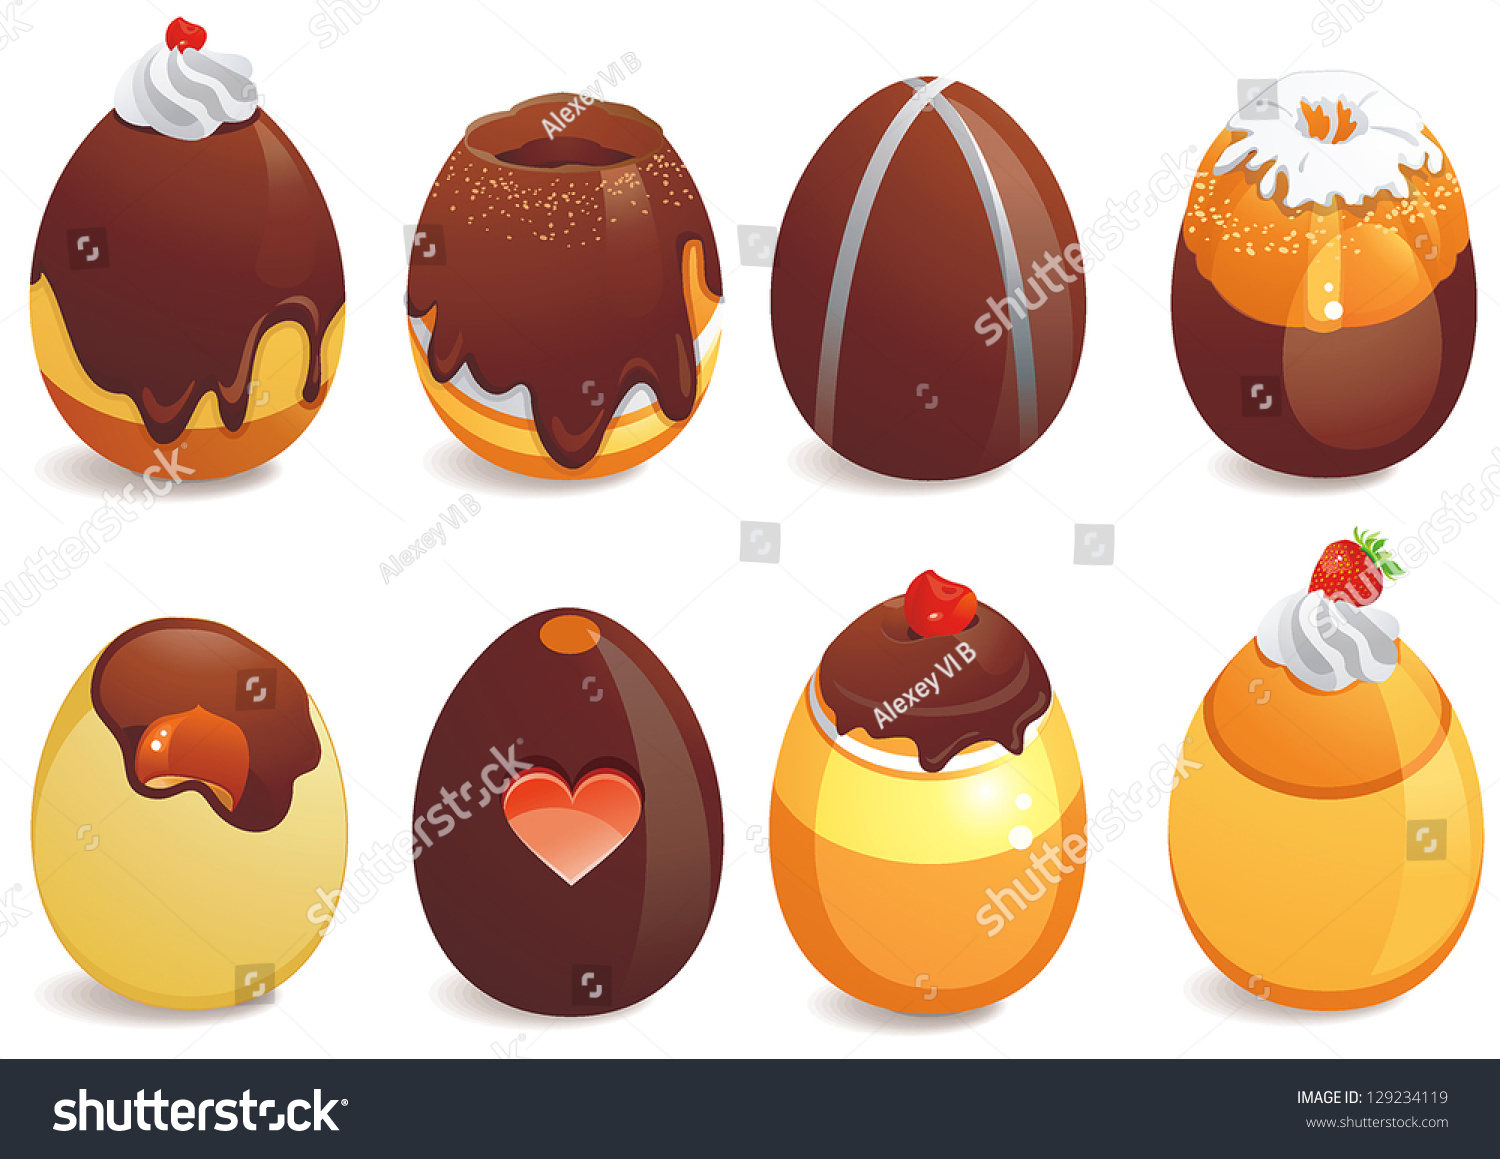 clipart chocolate easter eggs - photo #17